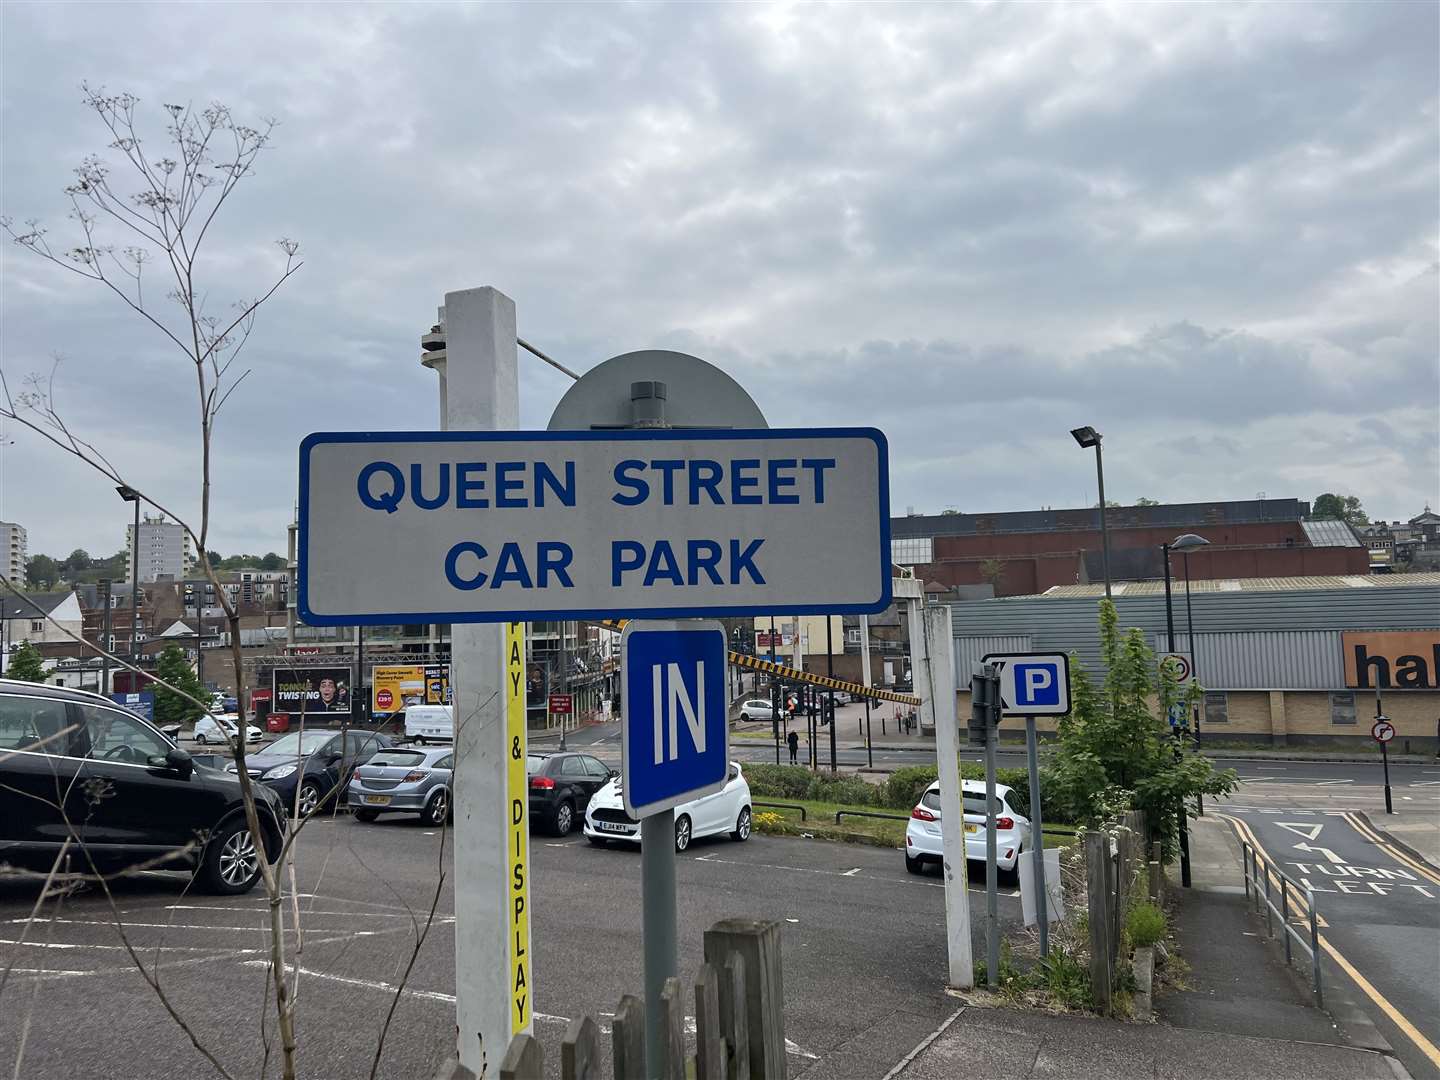 The Queen Street car park in Chatham